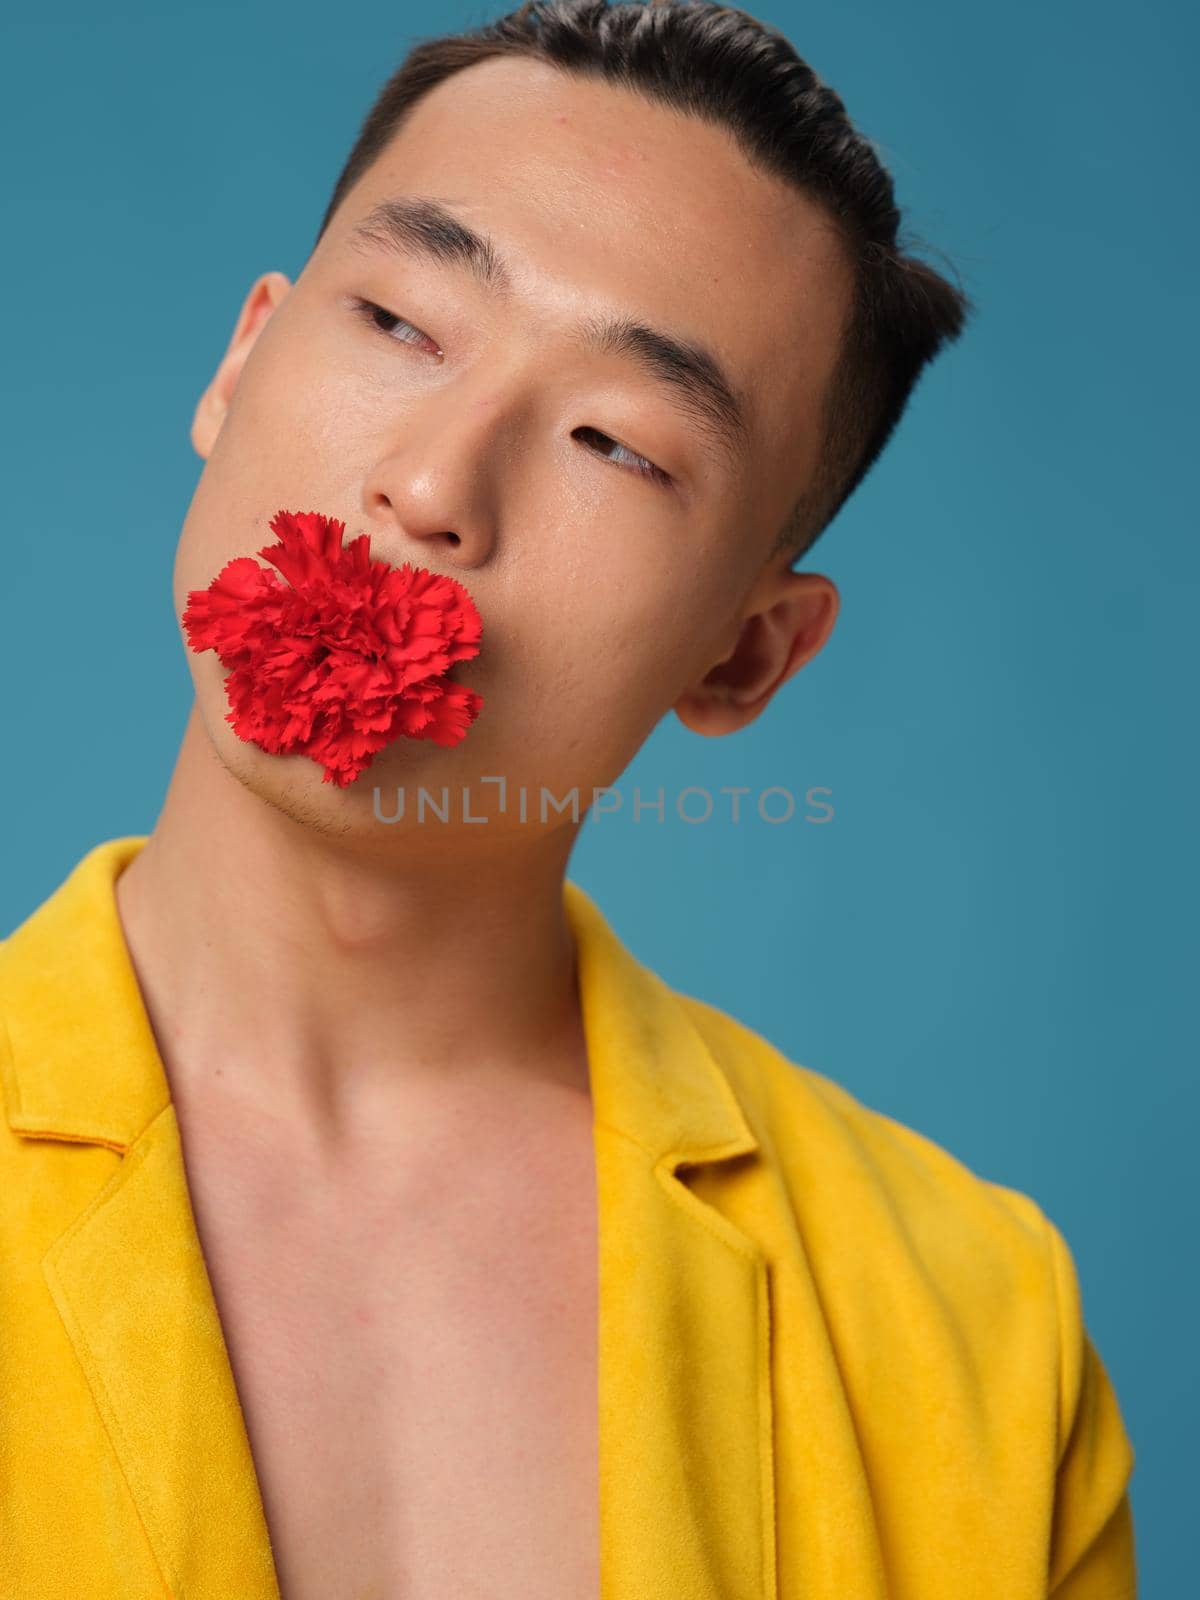 A man with a flower in his teeth on a blue background and an unbuttoned jacket by SHOTPRIME